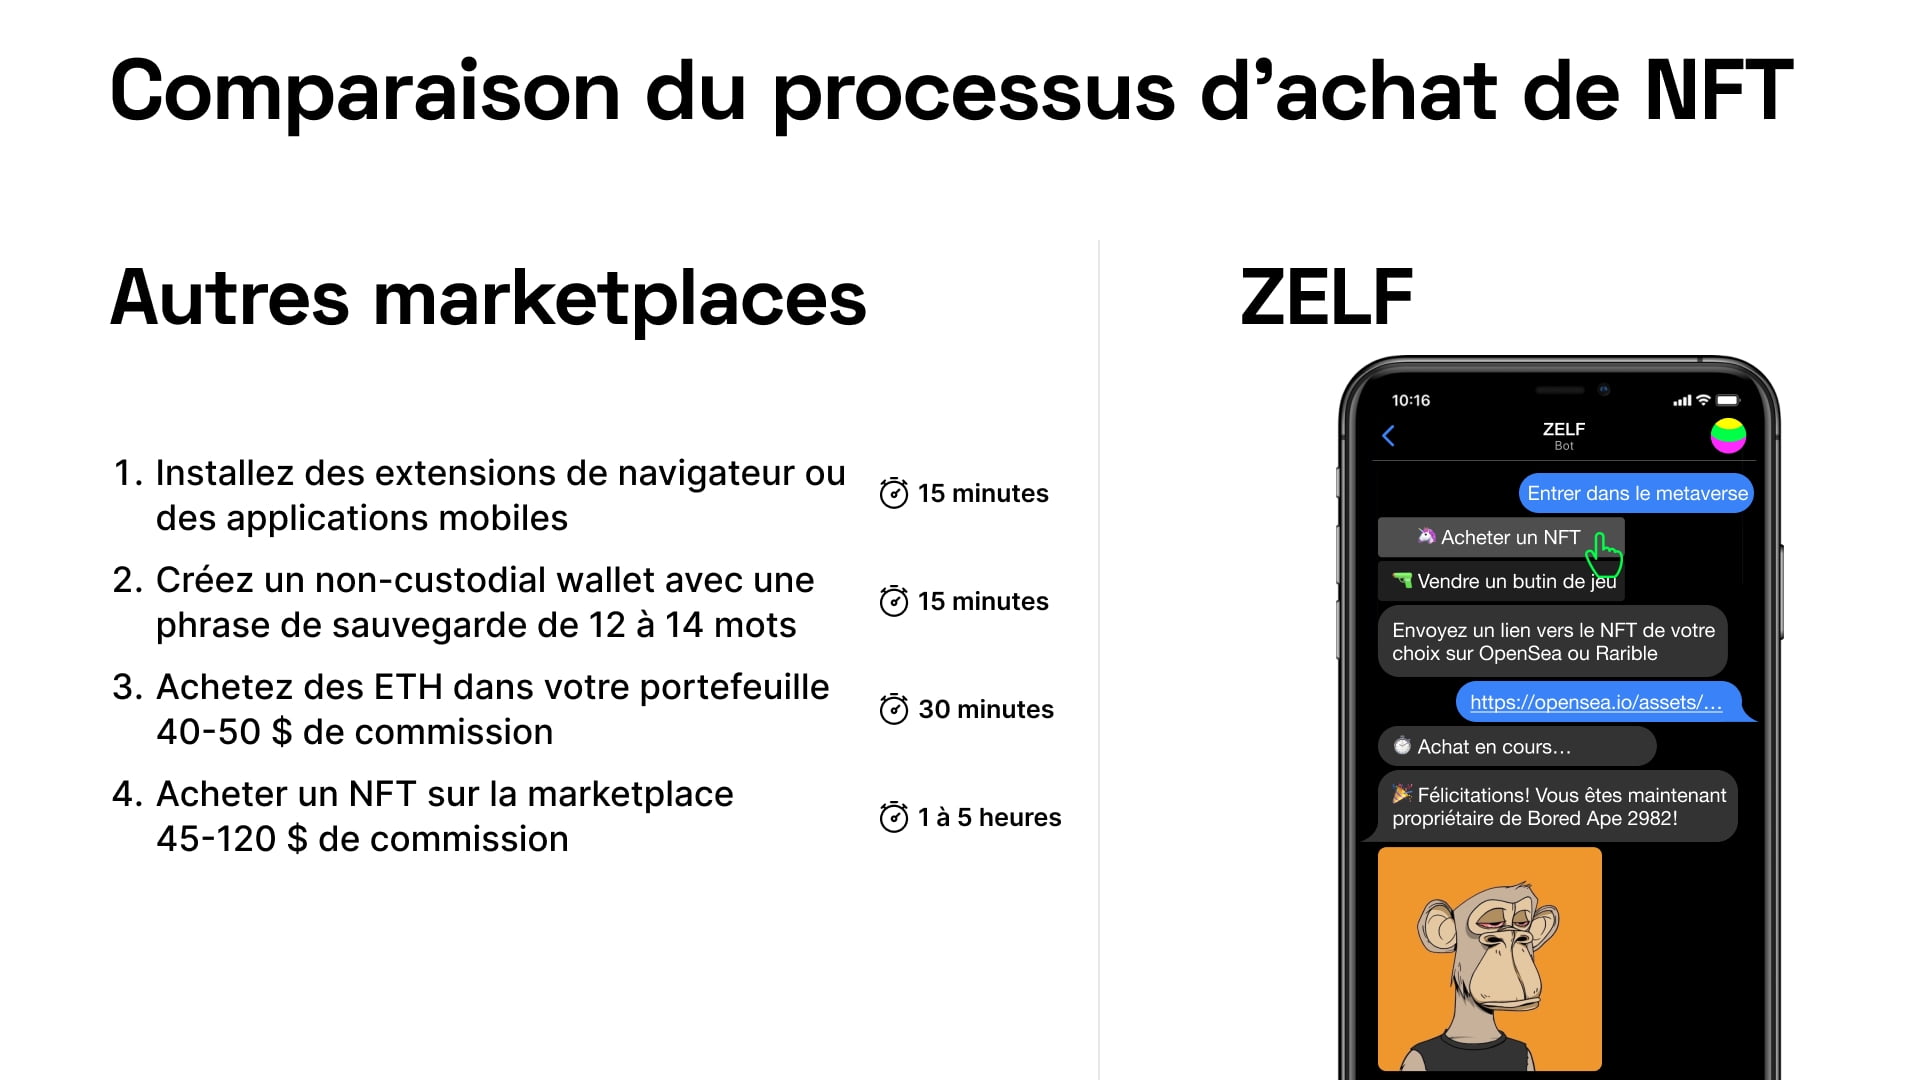 Comparison of NFT purchase between Zelf and other markets